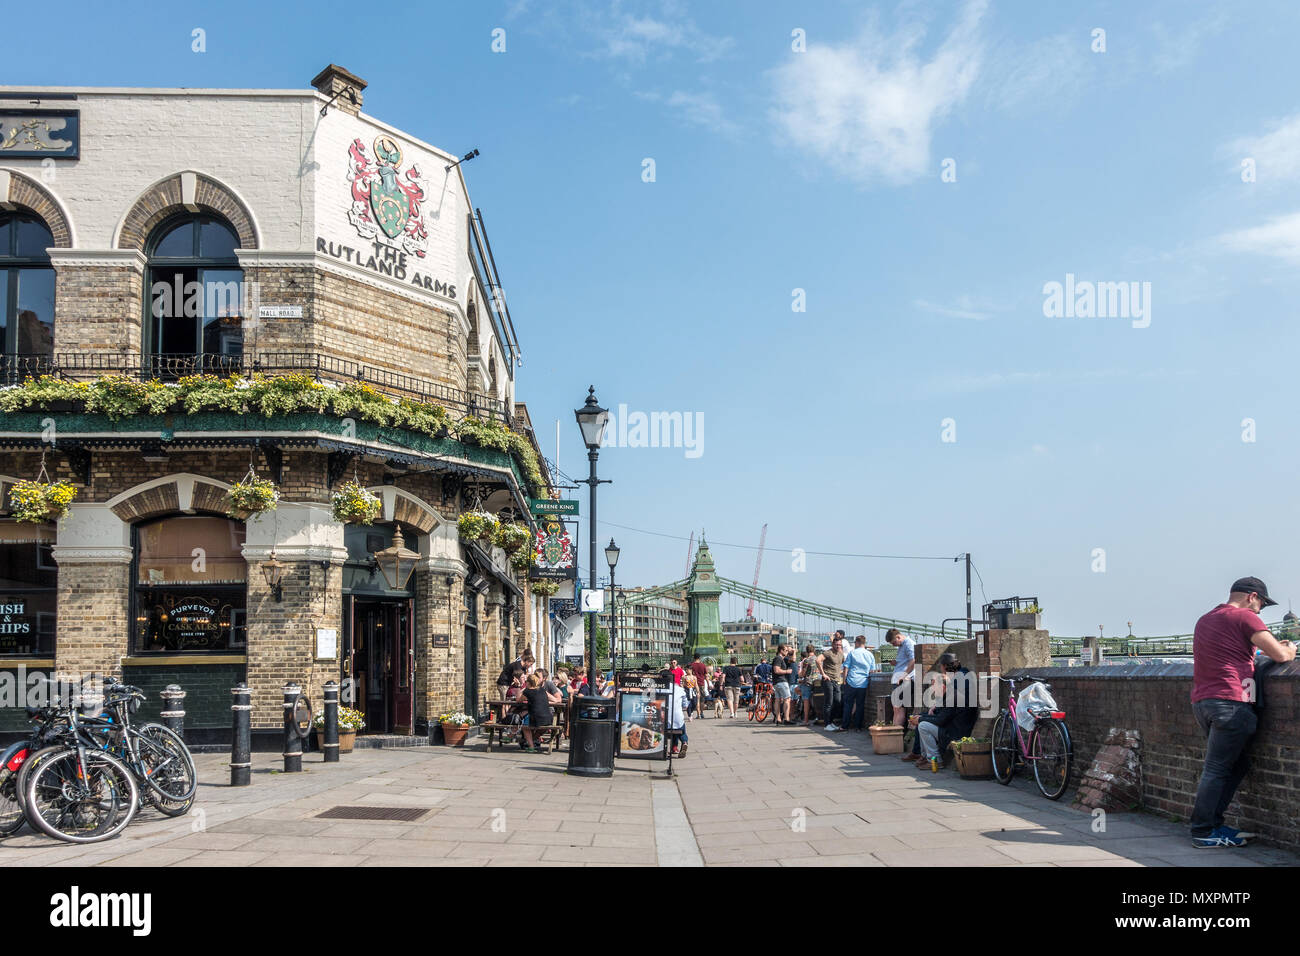 The Rutland Arms pub in Hammersmith, London is busy on a hot, sunny day. Stock Photo